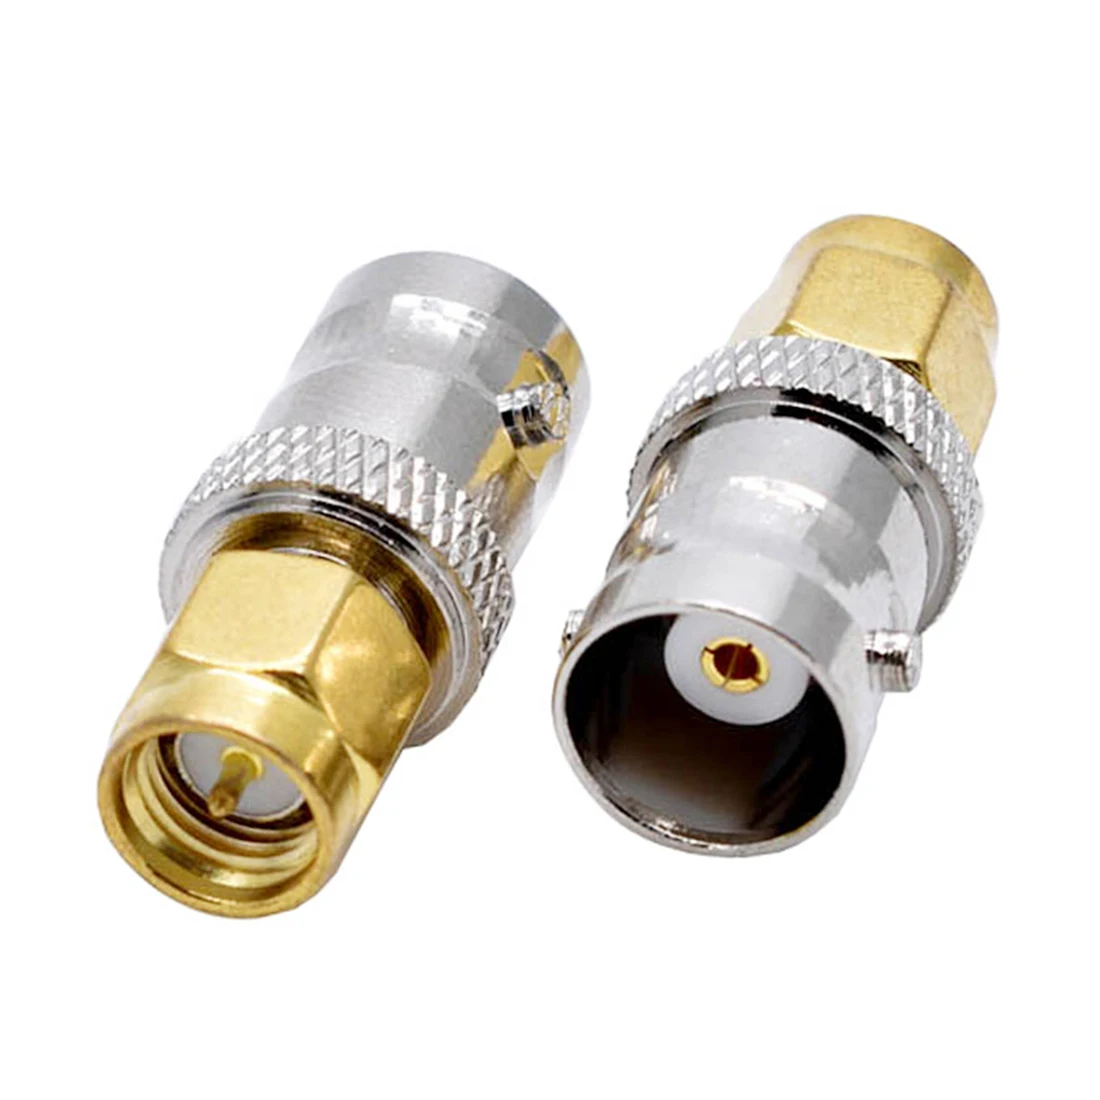 1pc BNC Female Jack to SMA Male Plug RF Coax Adapter Convertor Straight Nickelplated New Wholesale For CCTV